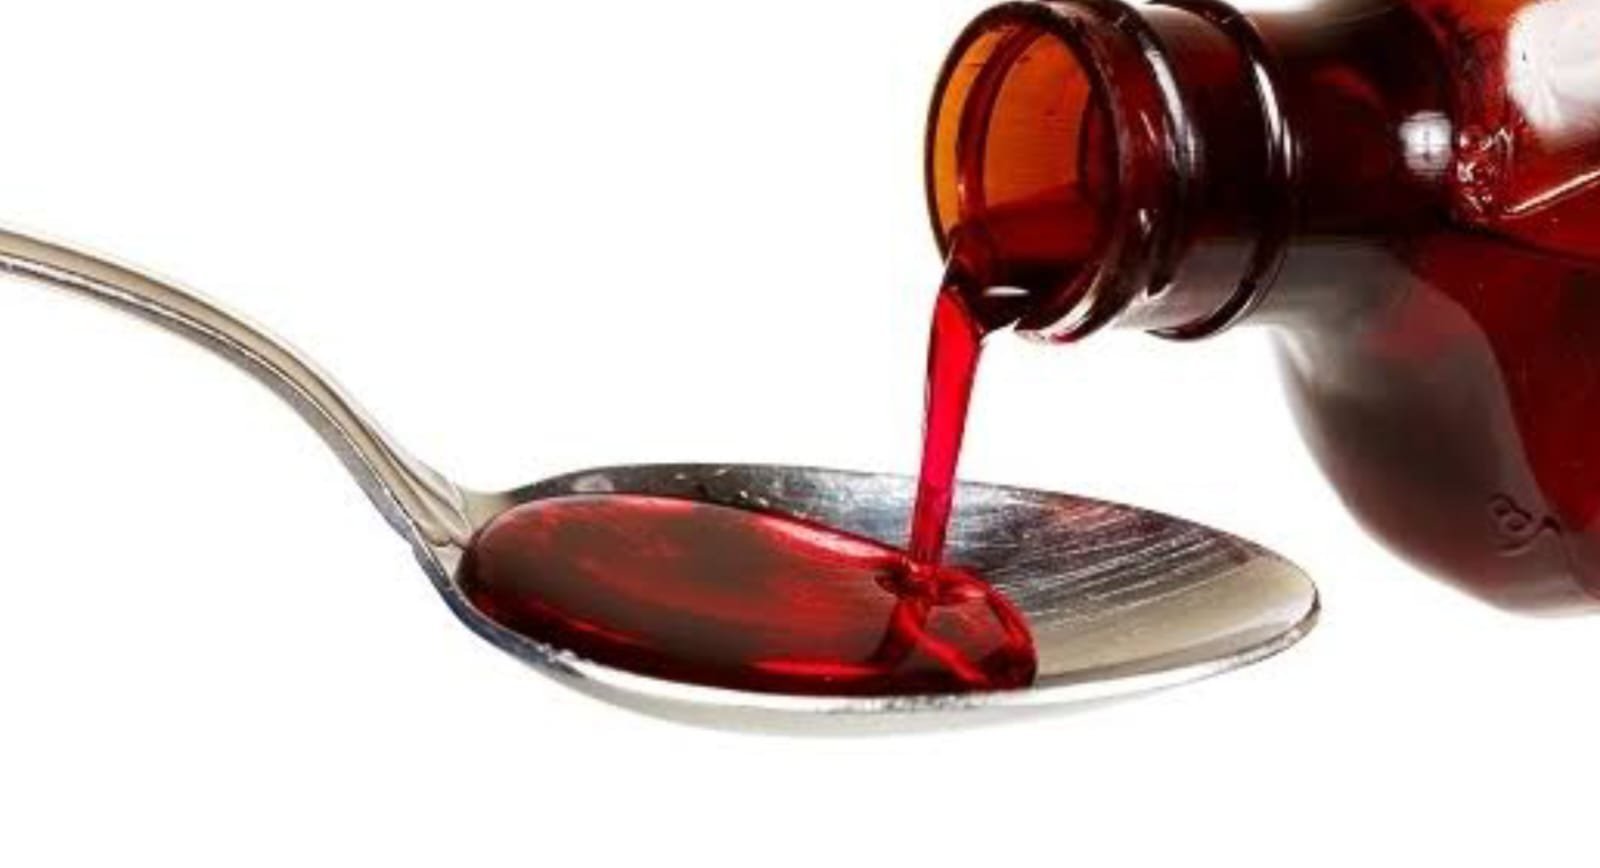 Indian Cough Syrups Slaughter Dozens of Children in Africa